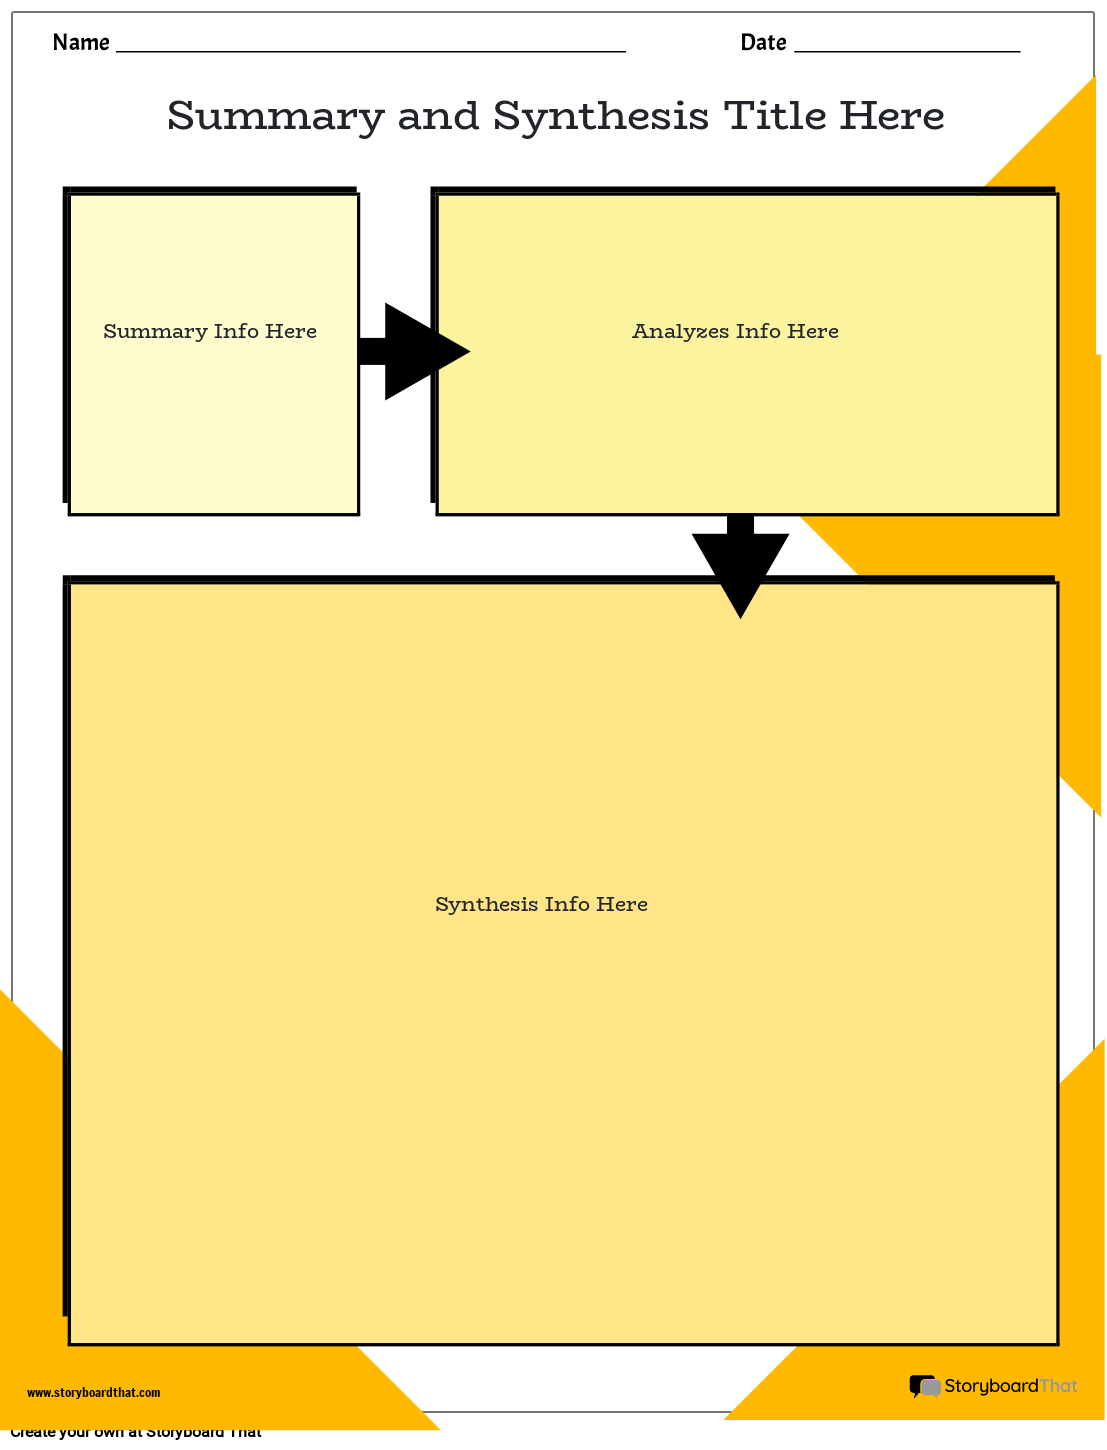 Summary & Synthesis Template with Yellow Theme